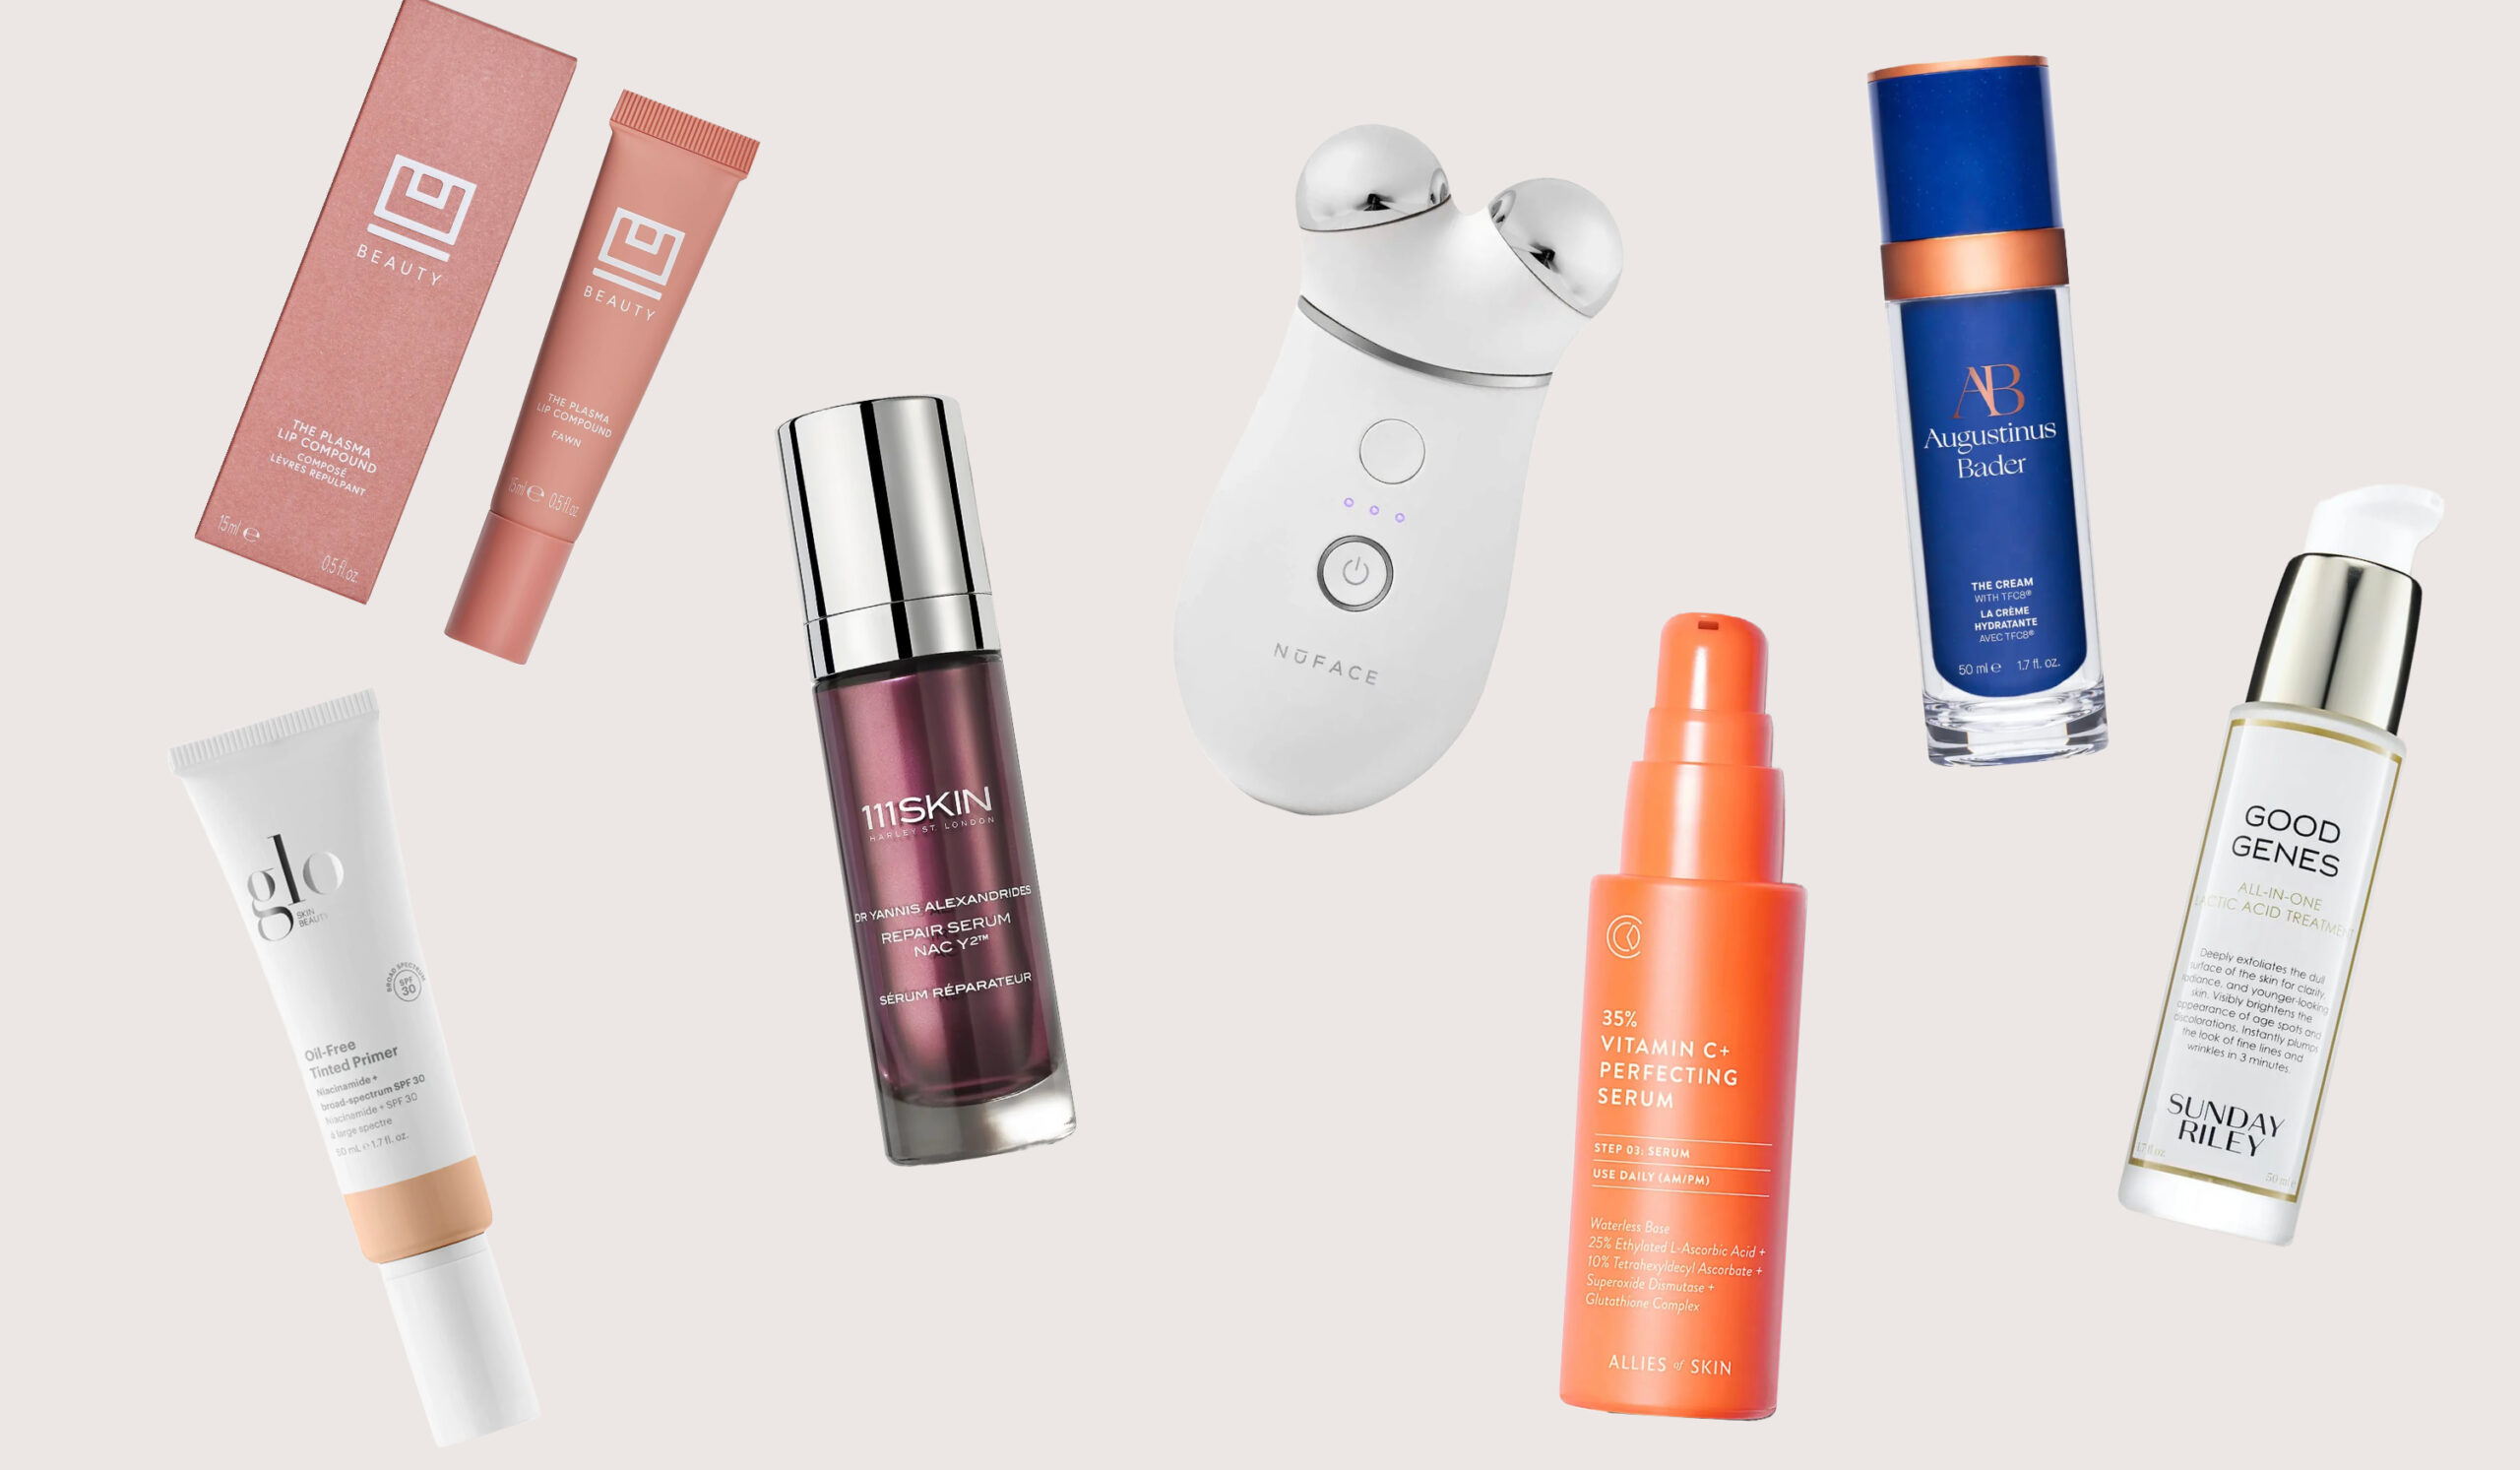 , Dermstore Anniversary Sale Must-Haves, According to Our Editors